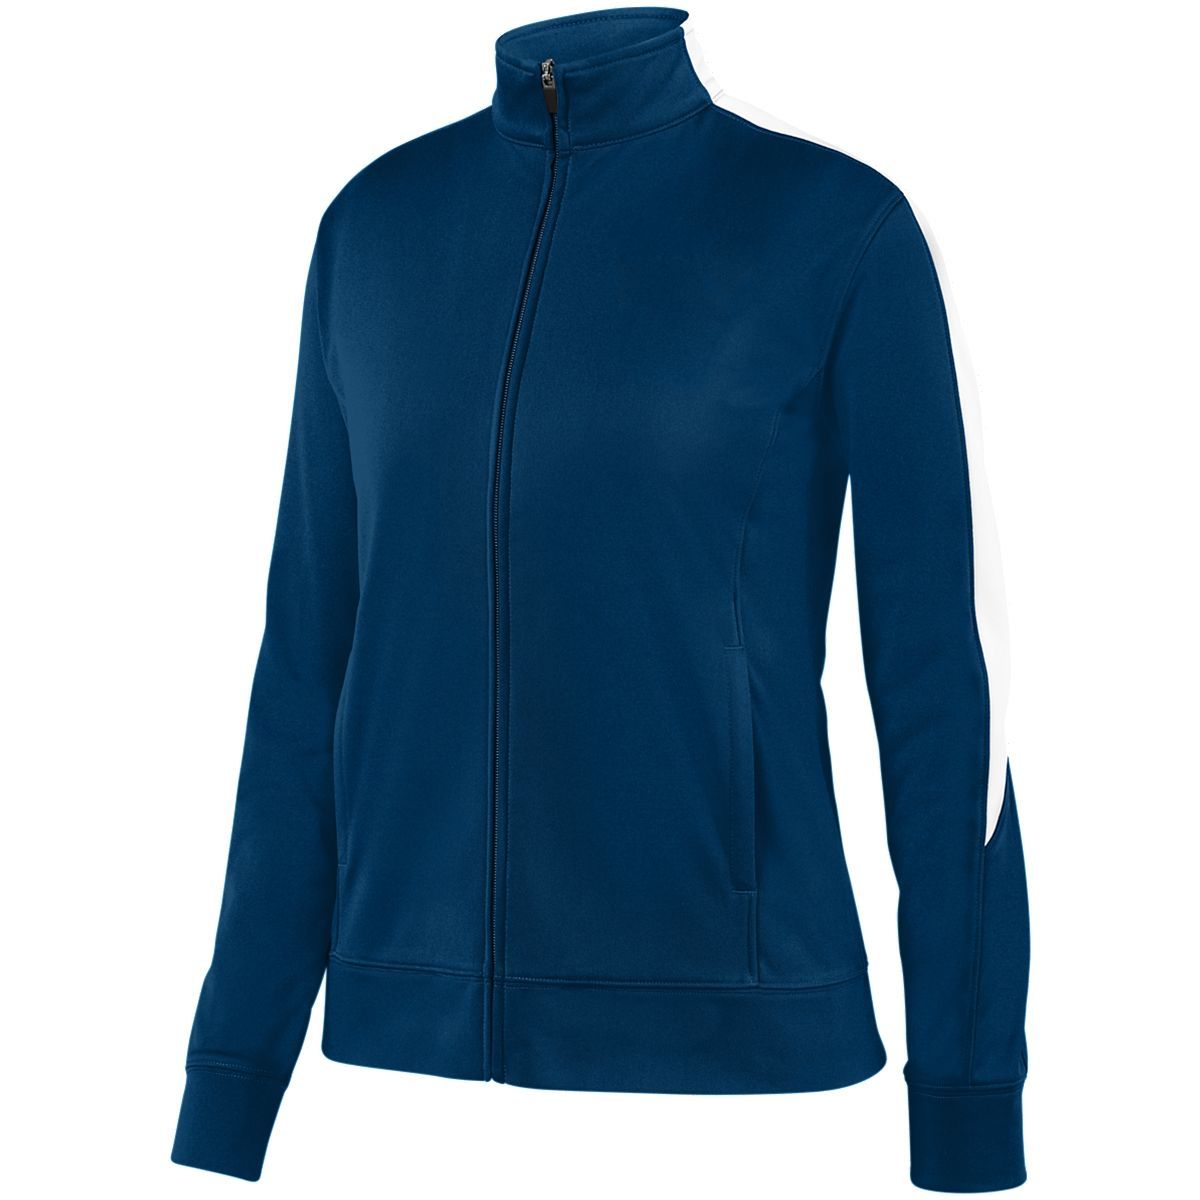 Augusta Sportswear Ladies Medalist Jacket 2.0 in Navy/White  -Part of the Ladies, Ladies-Jacket, Augusta-Products, Outerwear product lines at KanaleyCreations.com